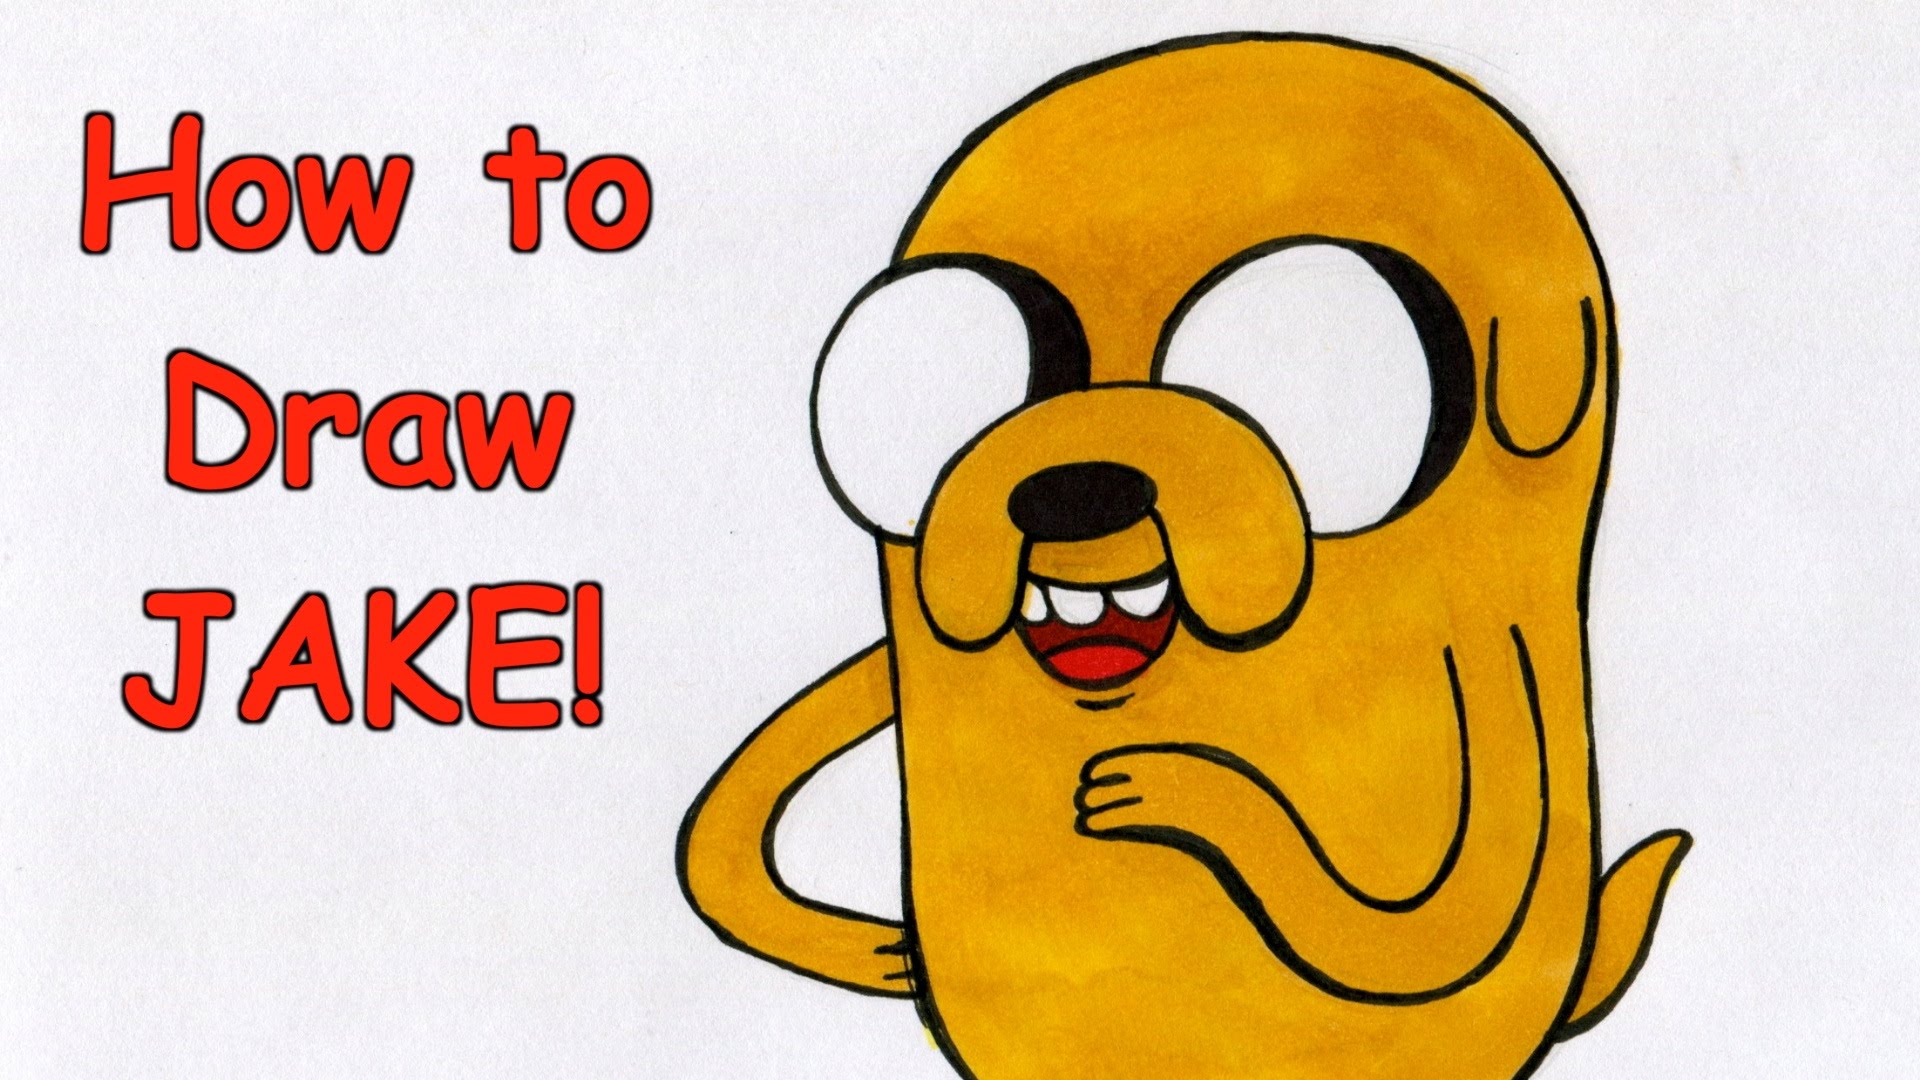 How To Draw Jake The Dog - Adventure Time - YouTube